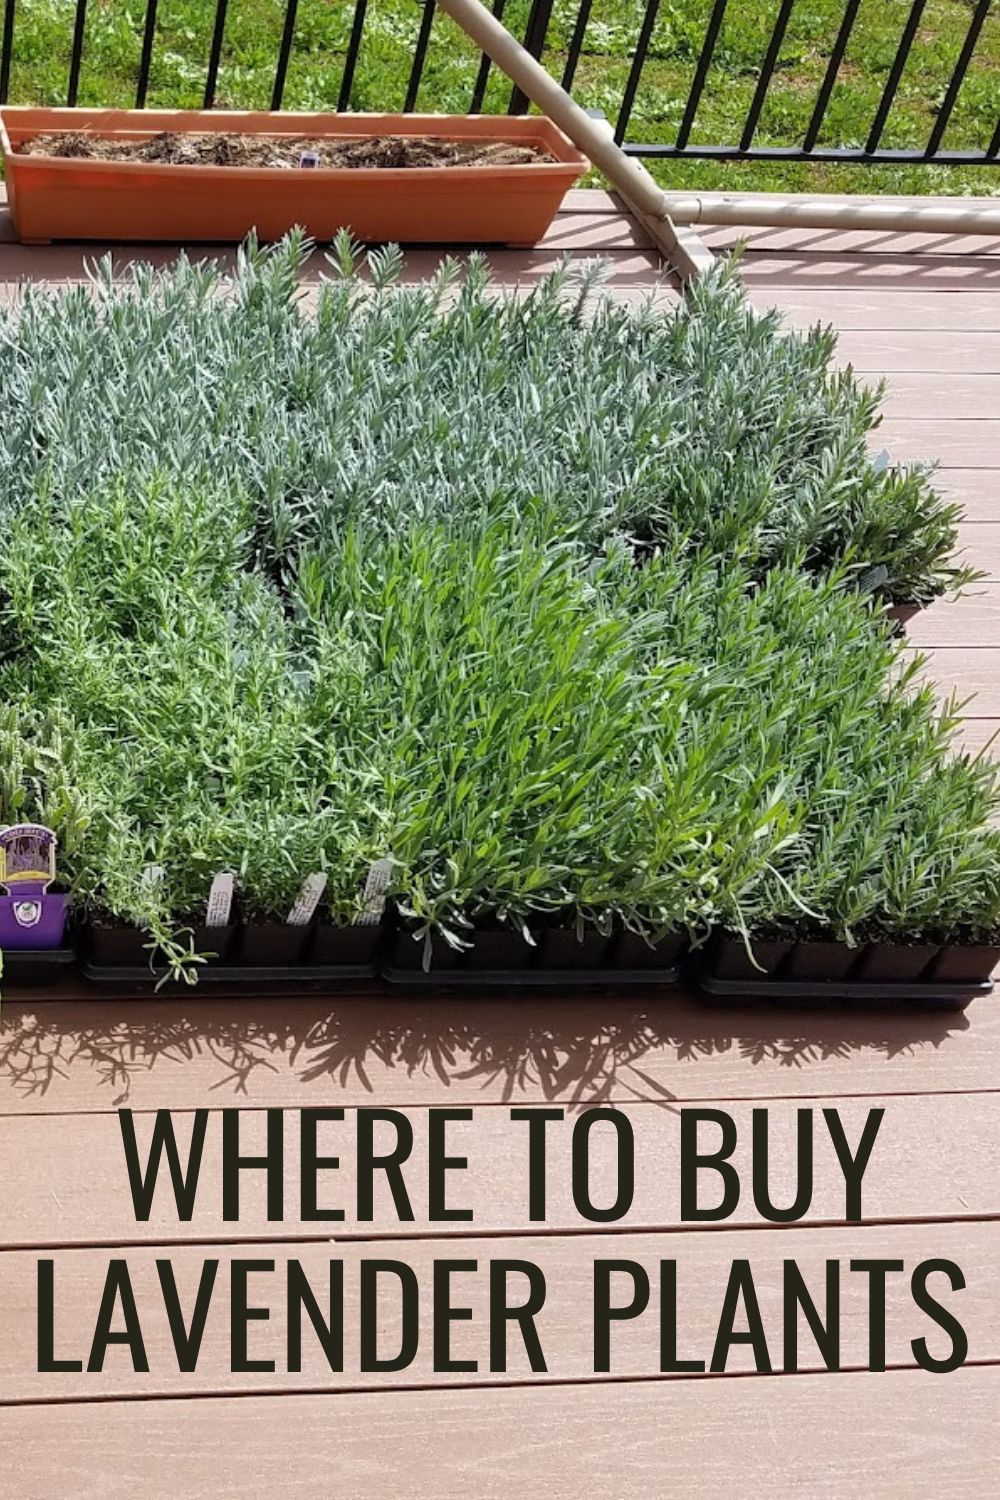 Where to buy lavender plants.